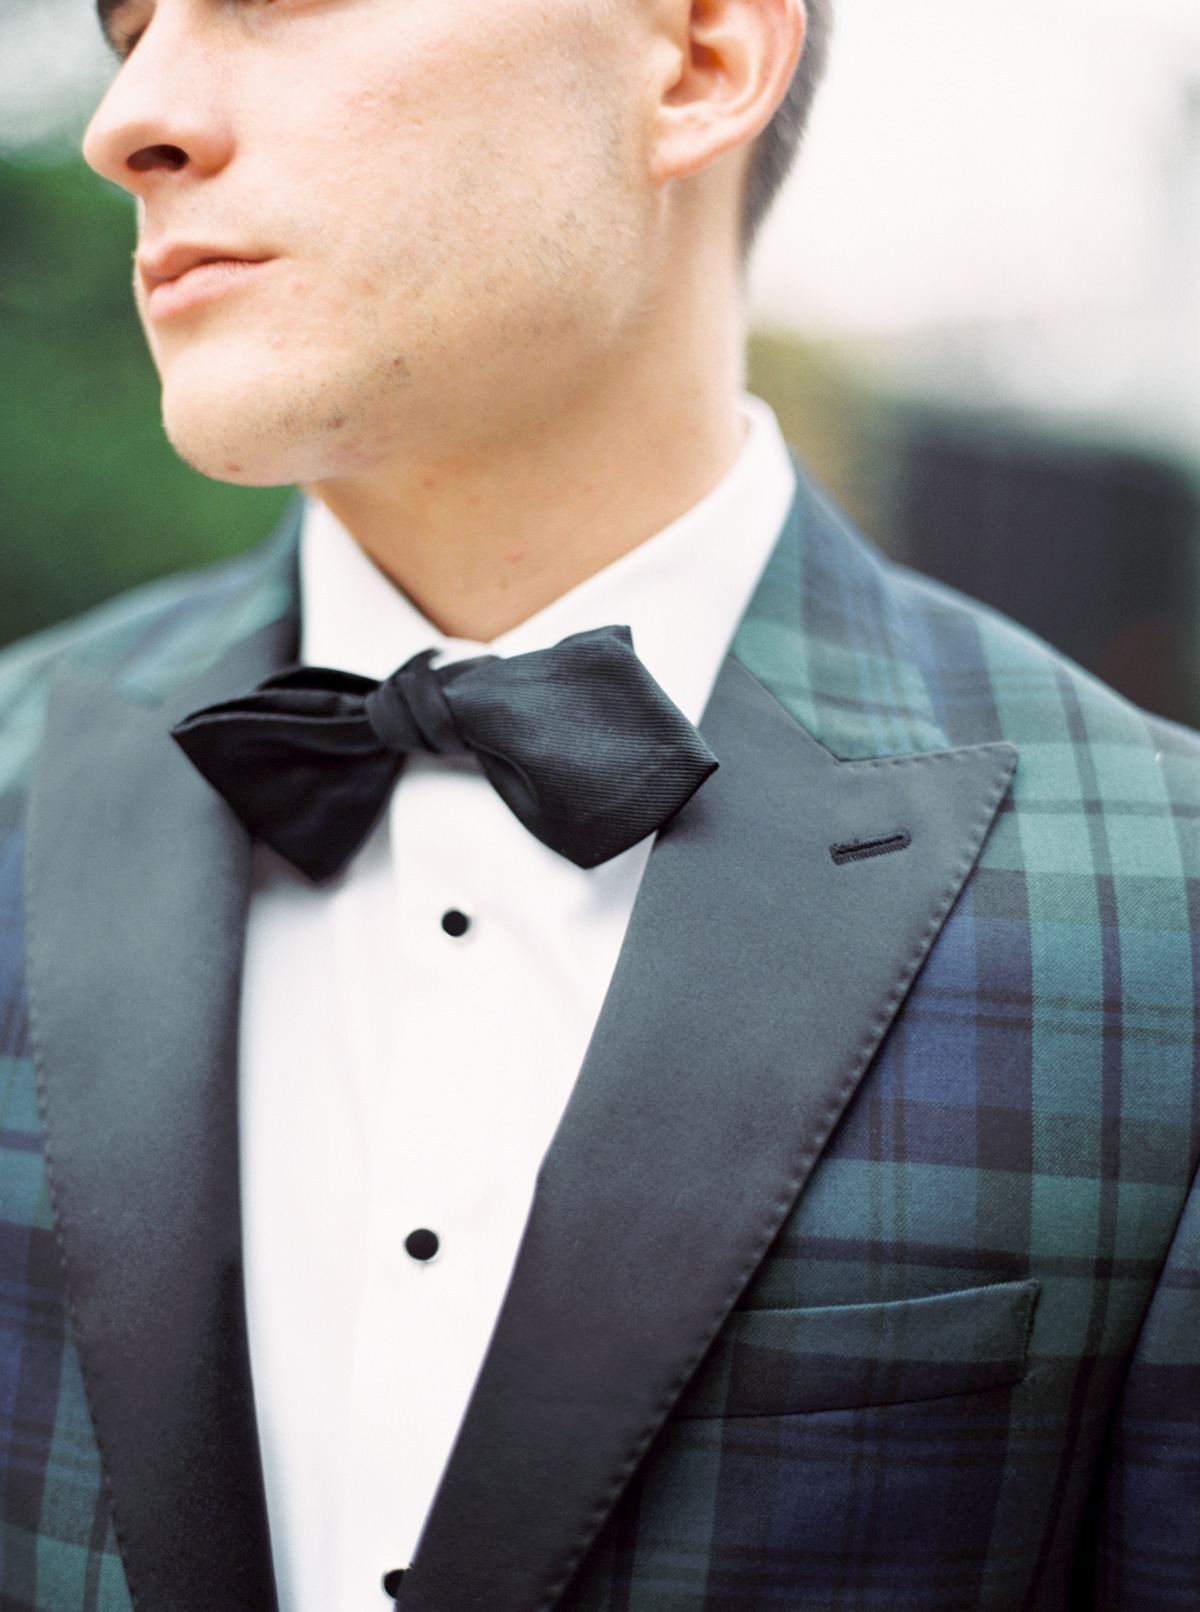 Plaid suit and bow tie